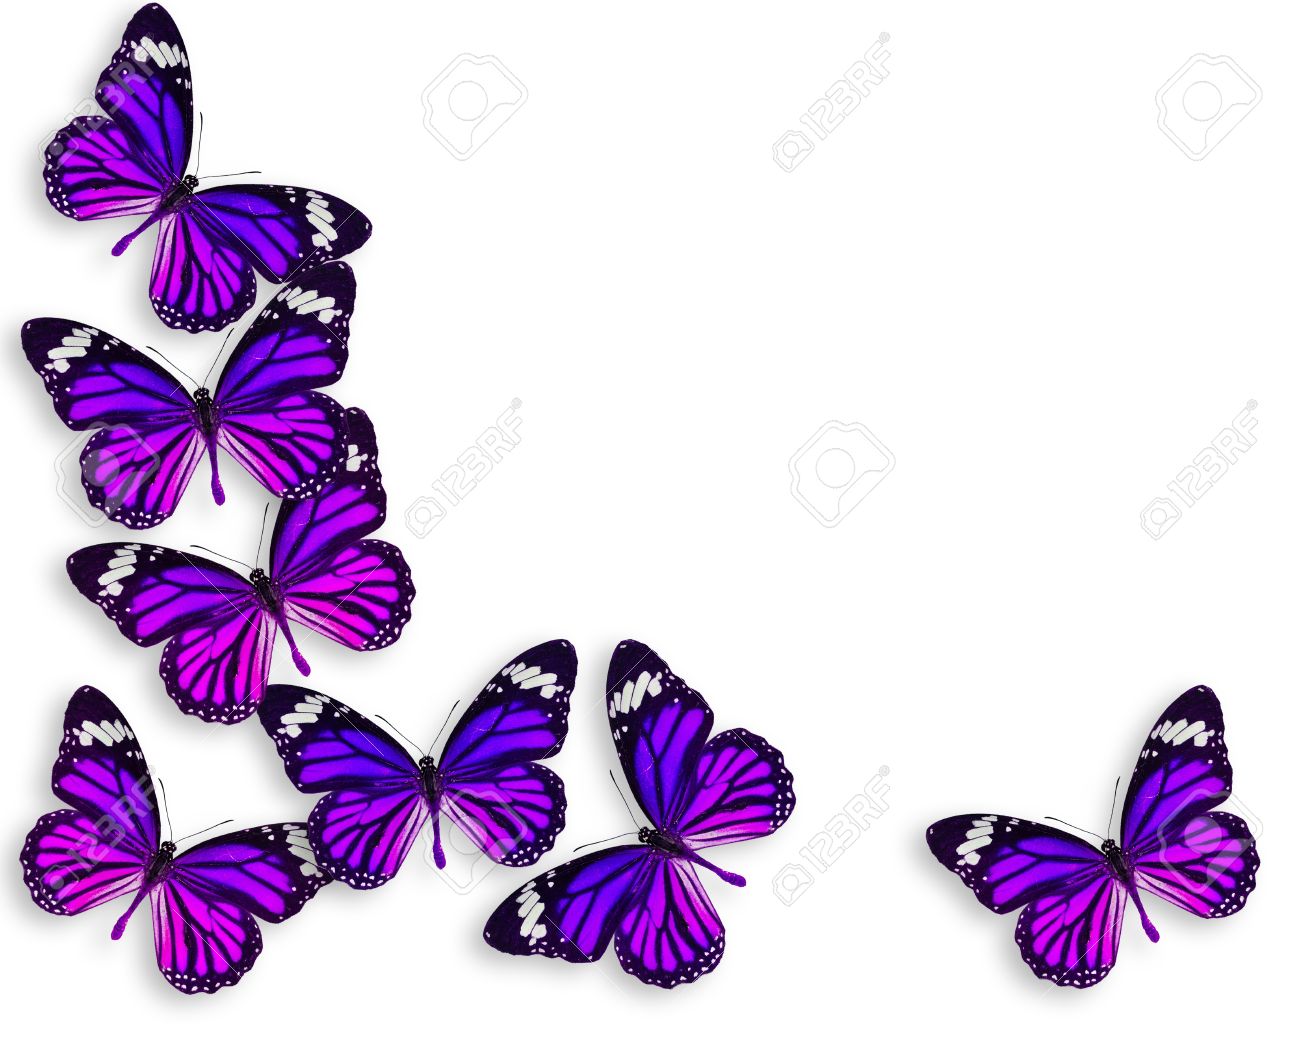 Background With Violet Butterfly Stock Photo Picture And Royalty